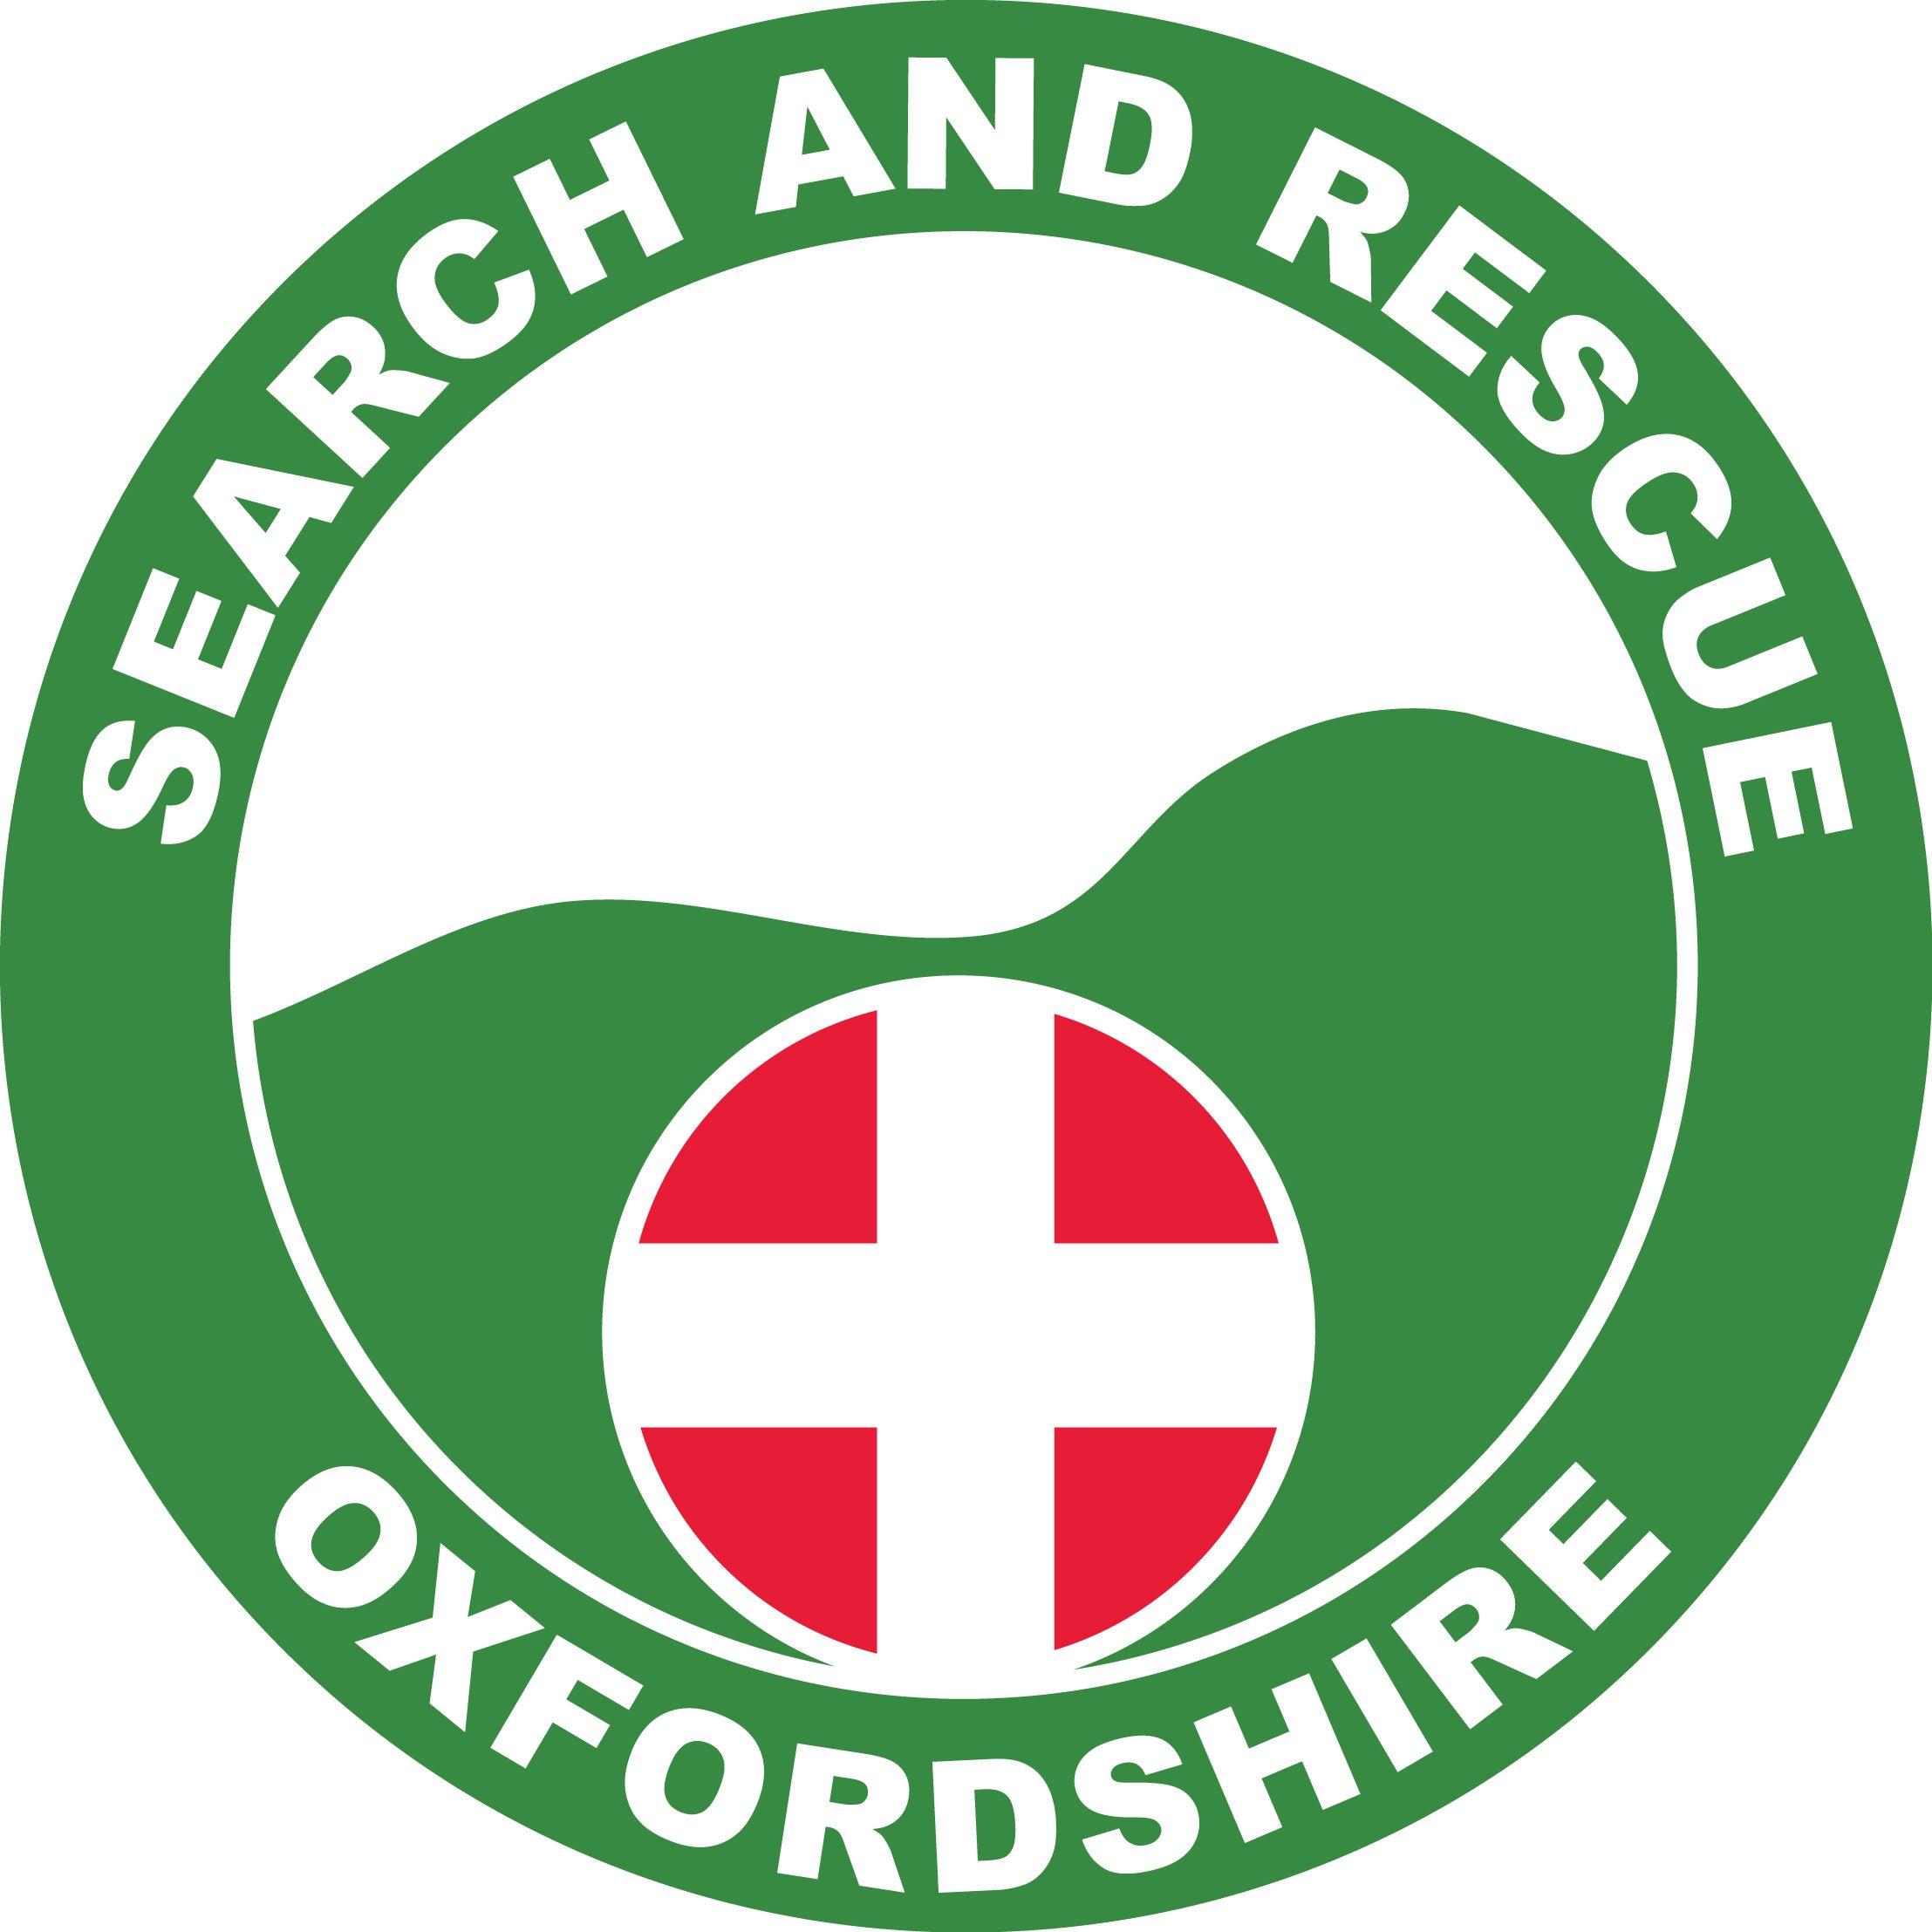 Search and Rescue Logo - Oxfordshire Lowland Search and Rescue: Helping vulnerable missing